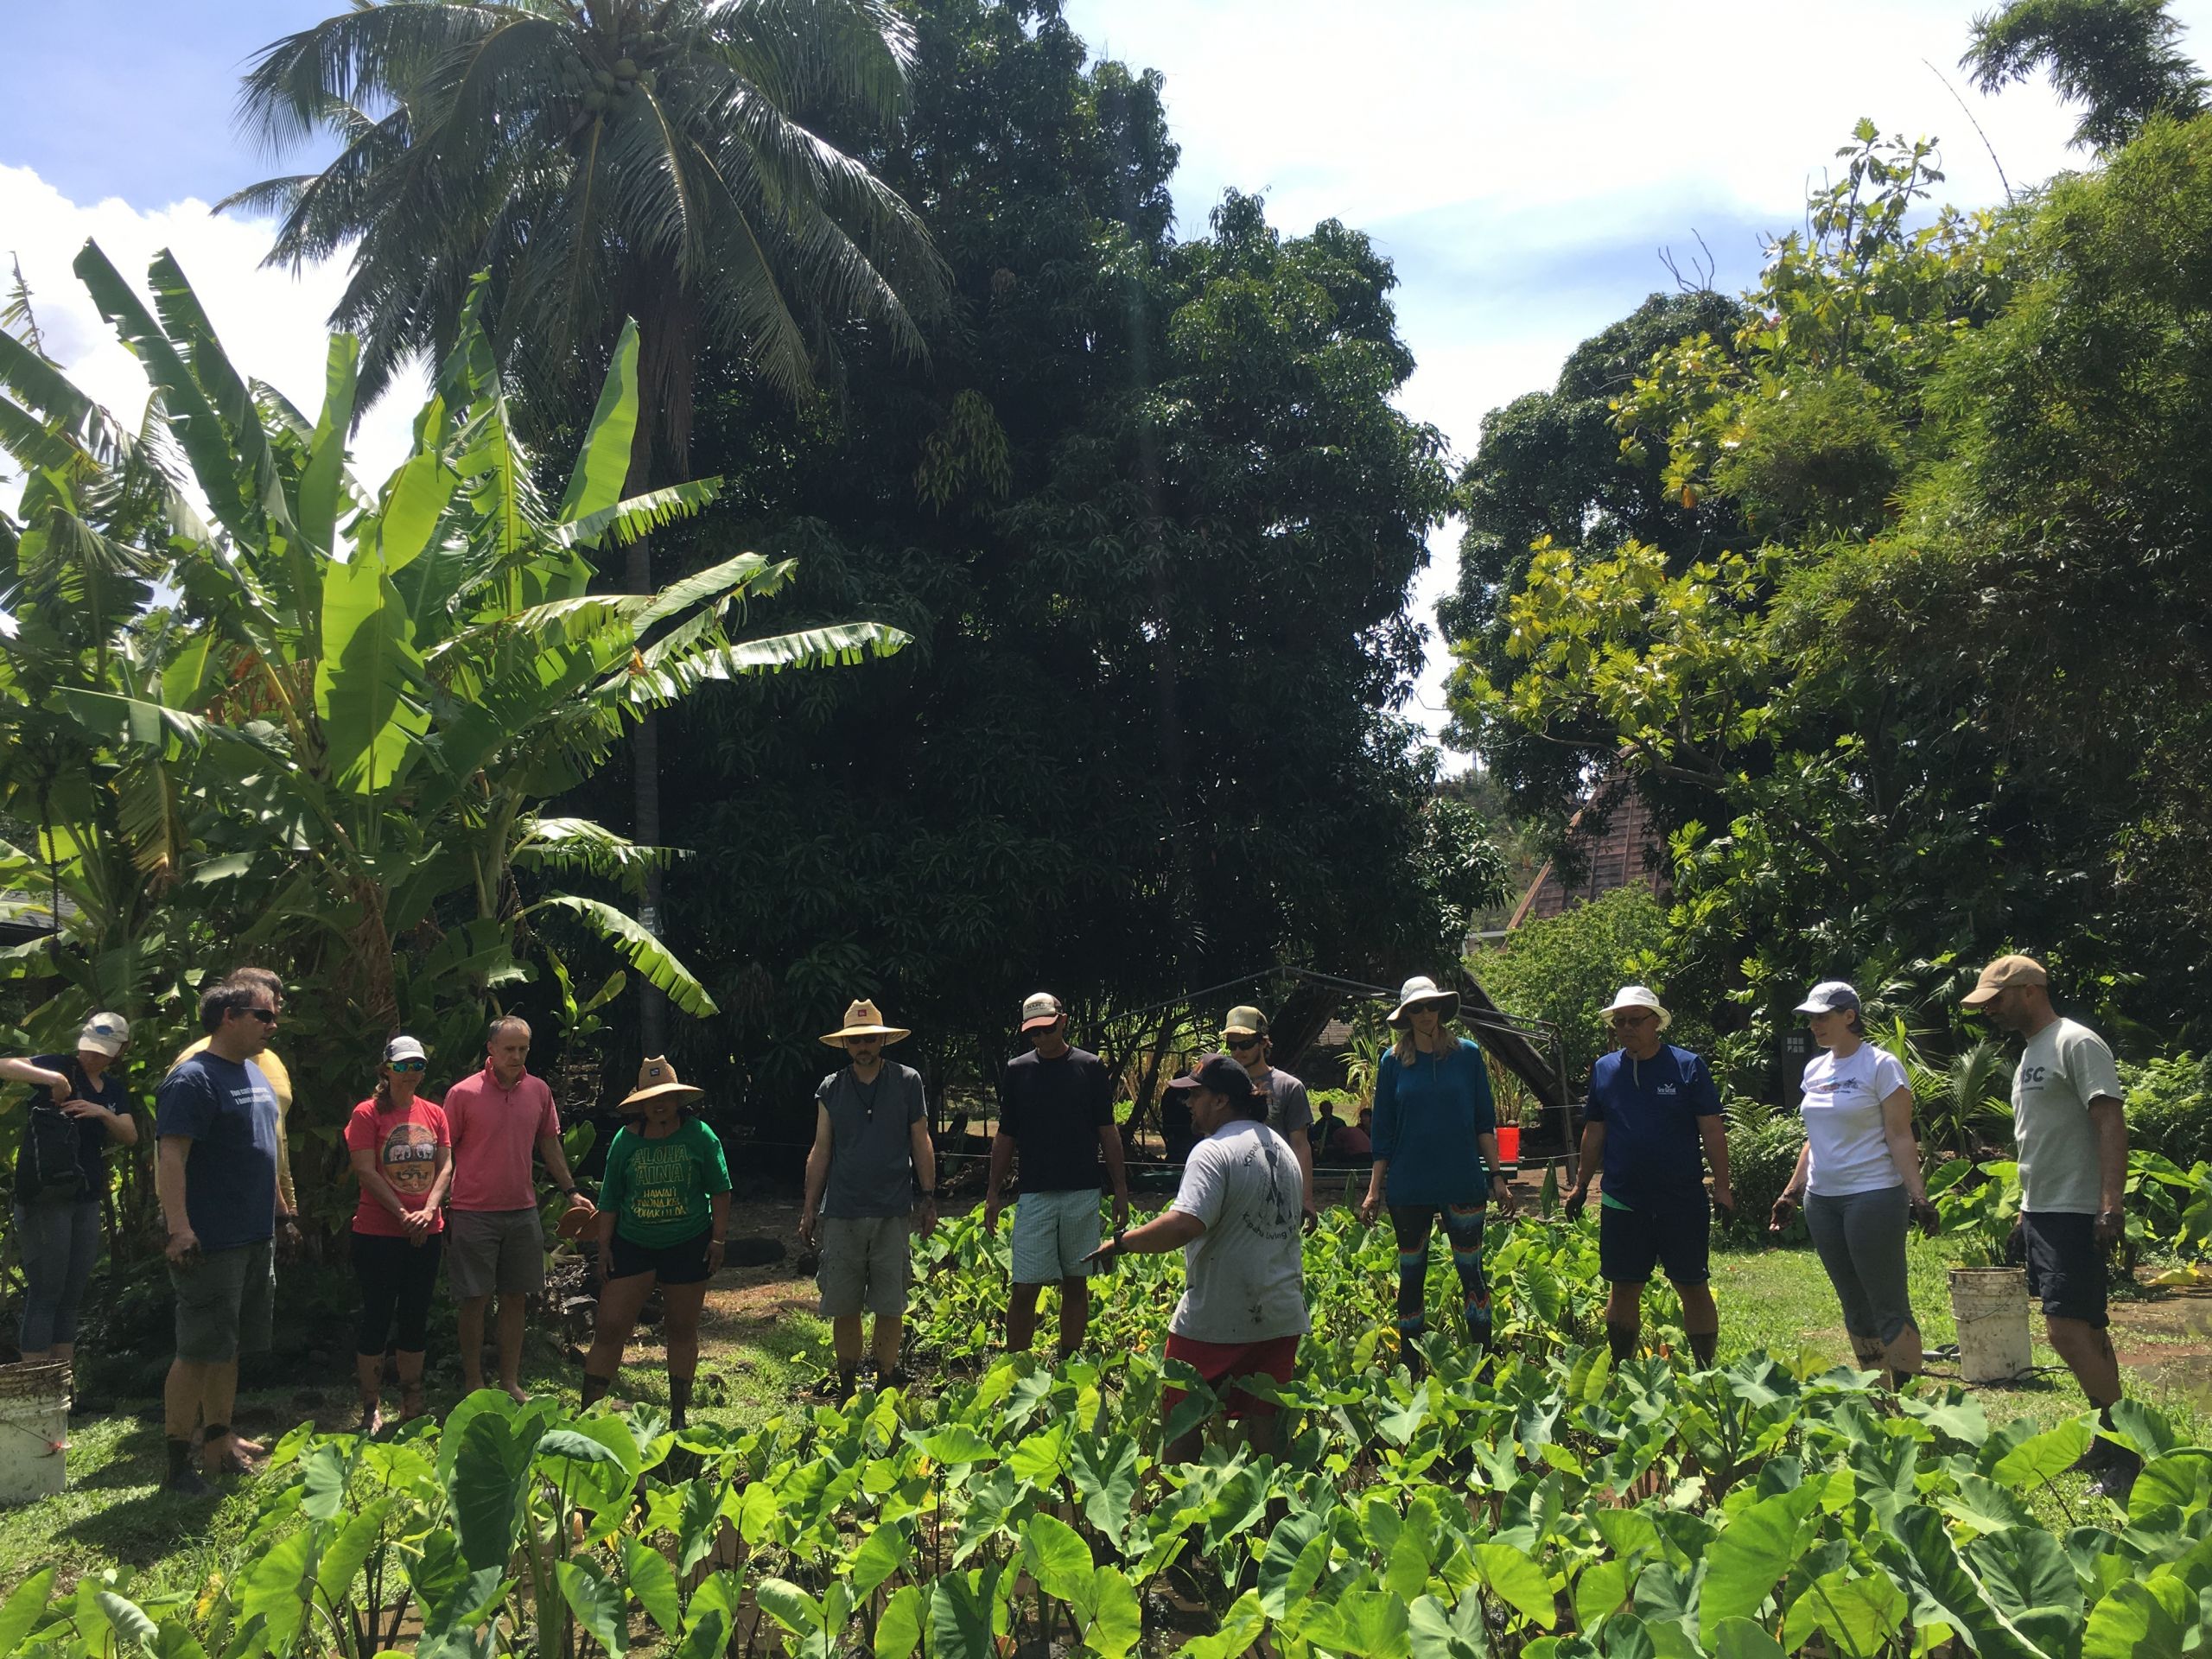 A line of people stand before a patch of Kalo or Taro.